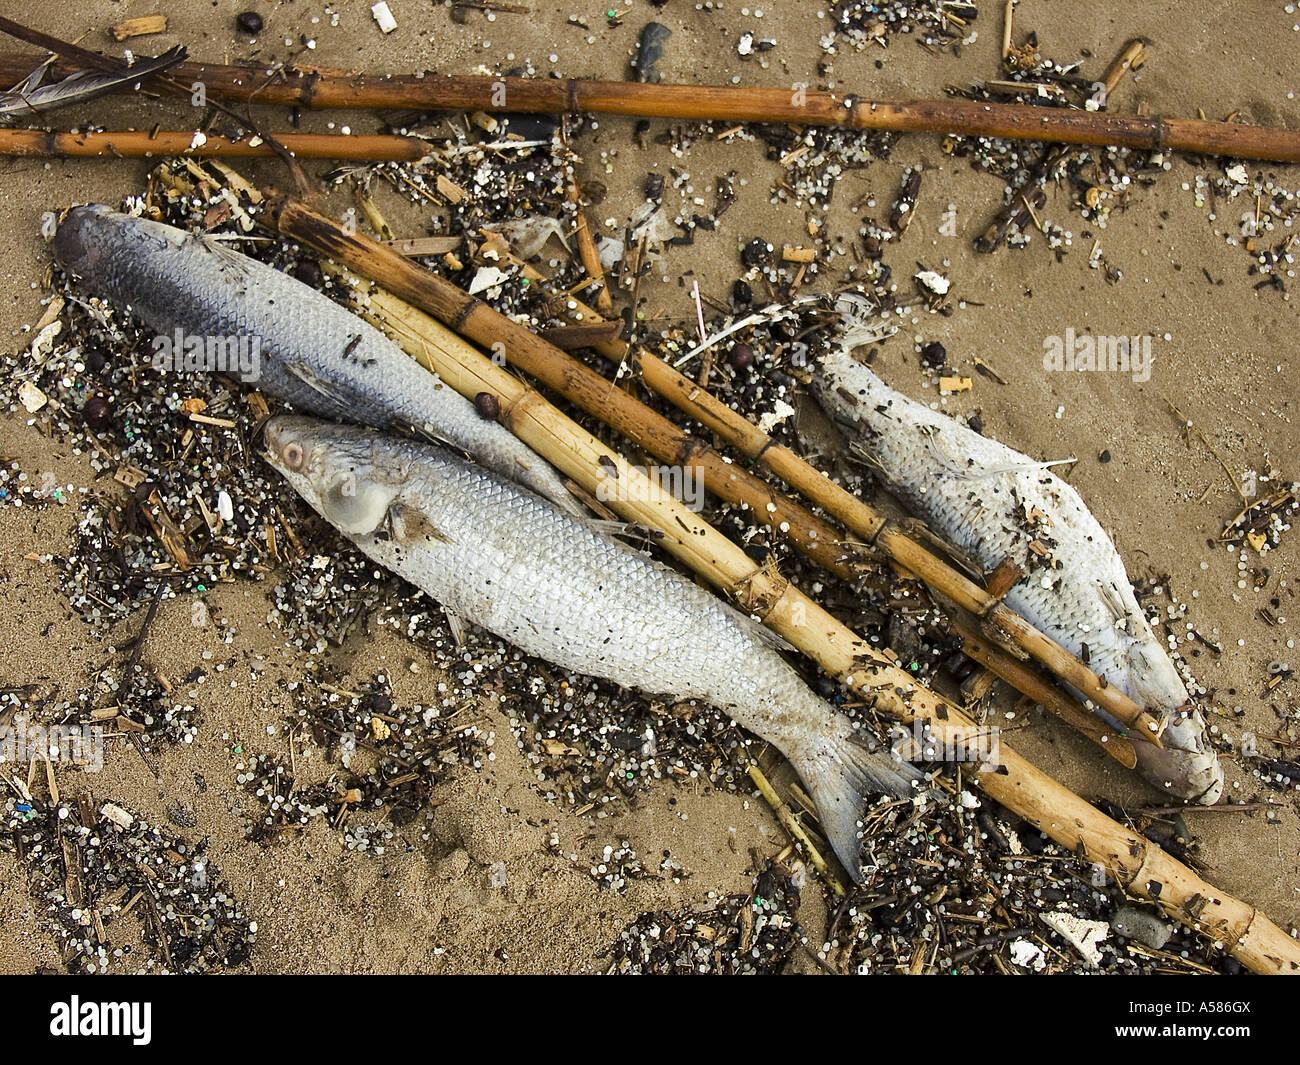 Dead stranded fishes on the beach Stock Photo